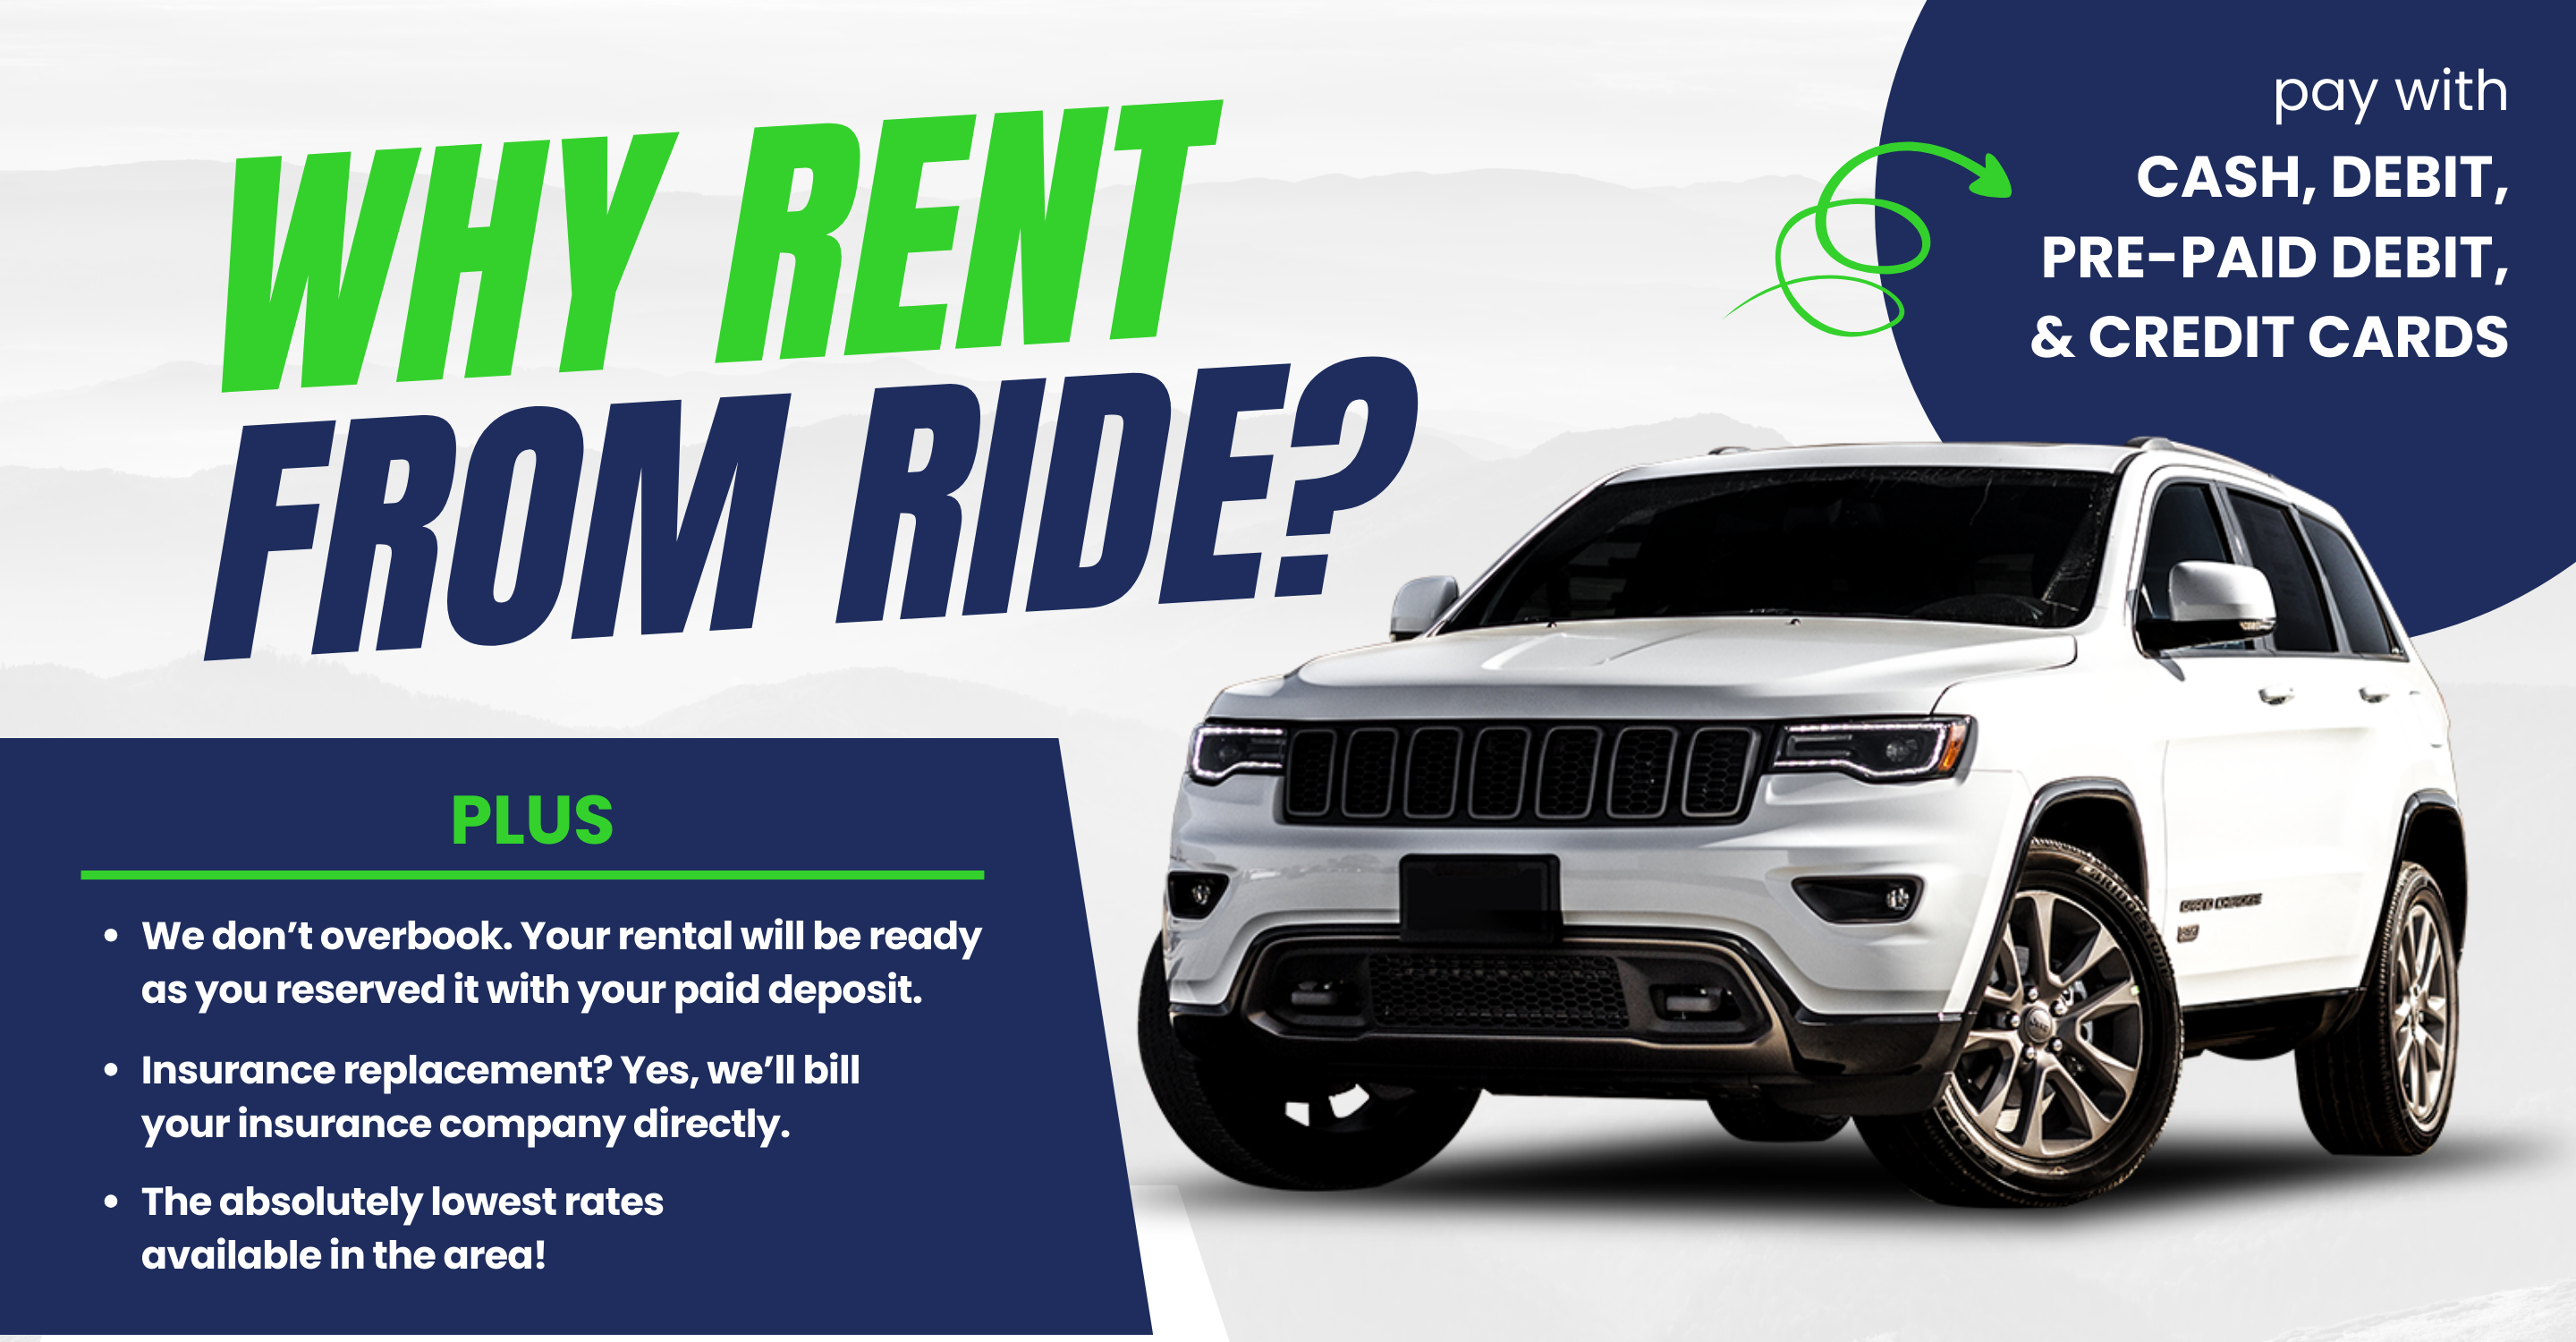 Why Rent from Ride? Pay with cash, credit, debit, and pre-paid debit!